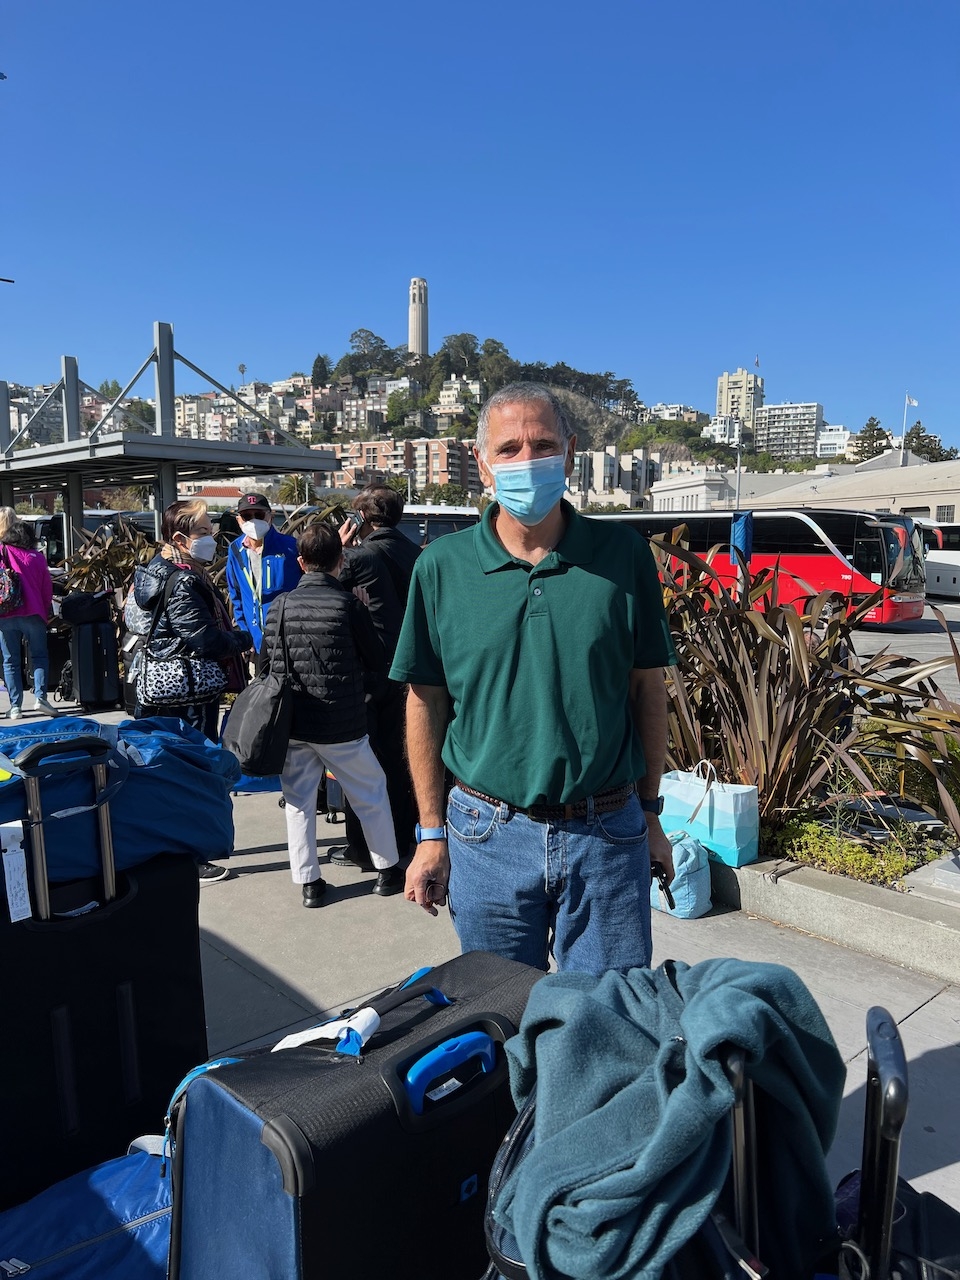 We Left the Ship, . . . In San Francisco!  Touring around and heading home. Yikes – We got COVID!